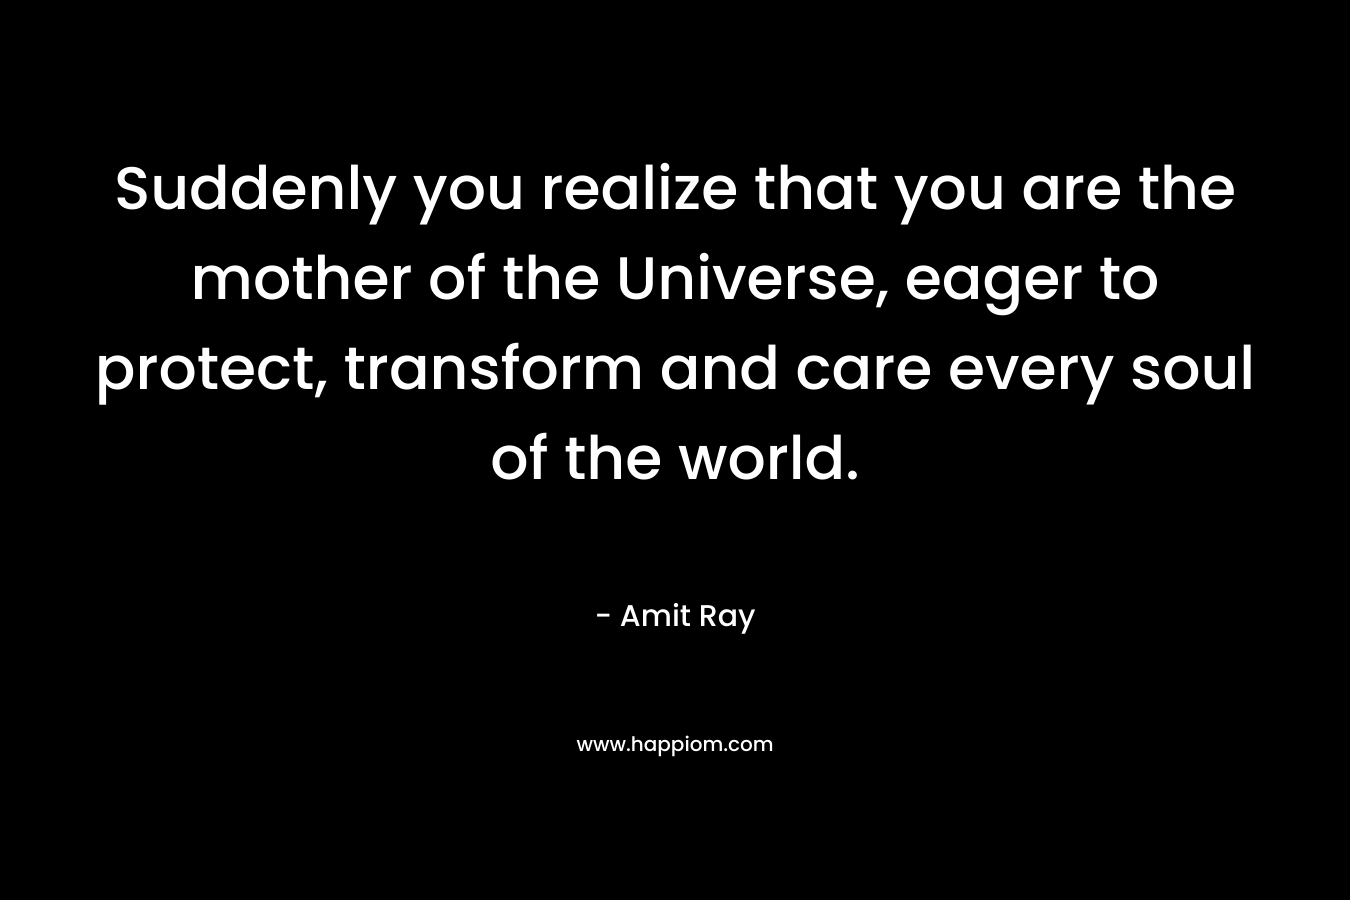 Suddenly you realize that you are the mother of the Universe, eager to protect, transform and care every soul of the world.